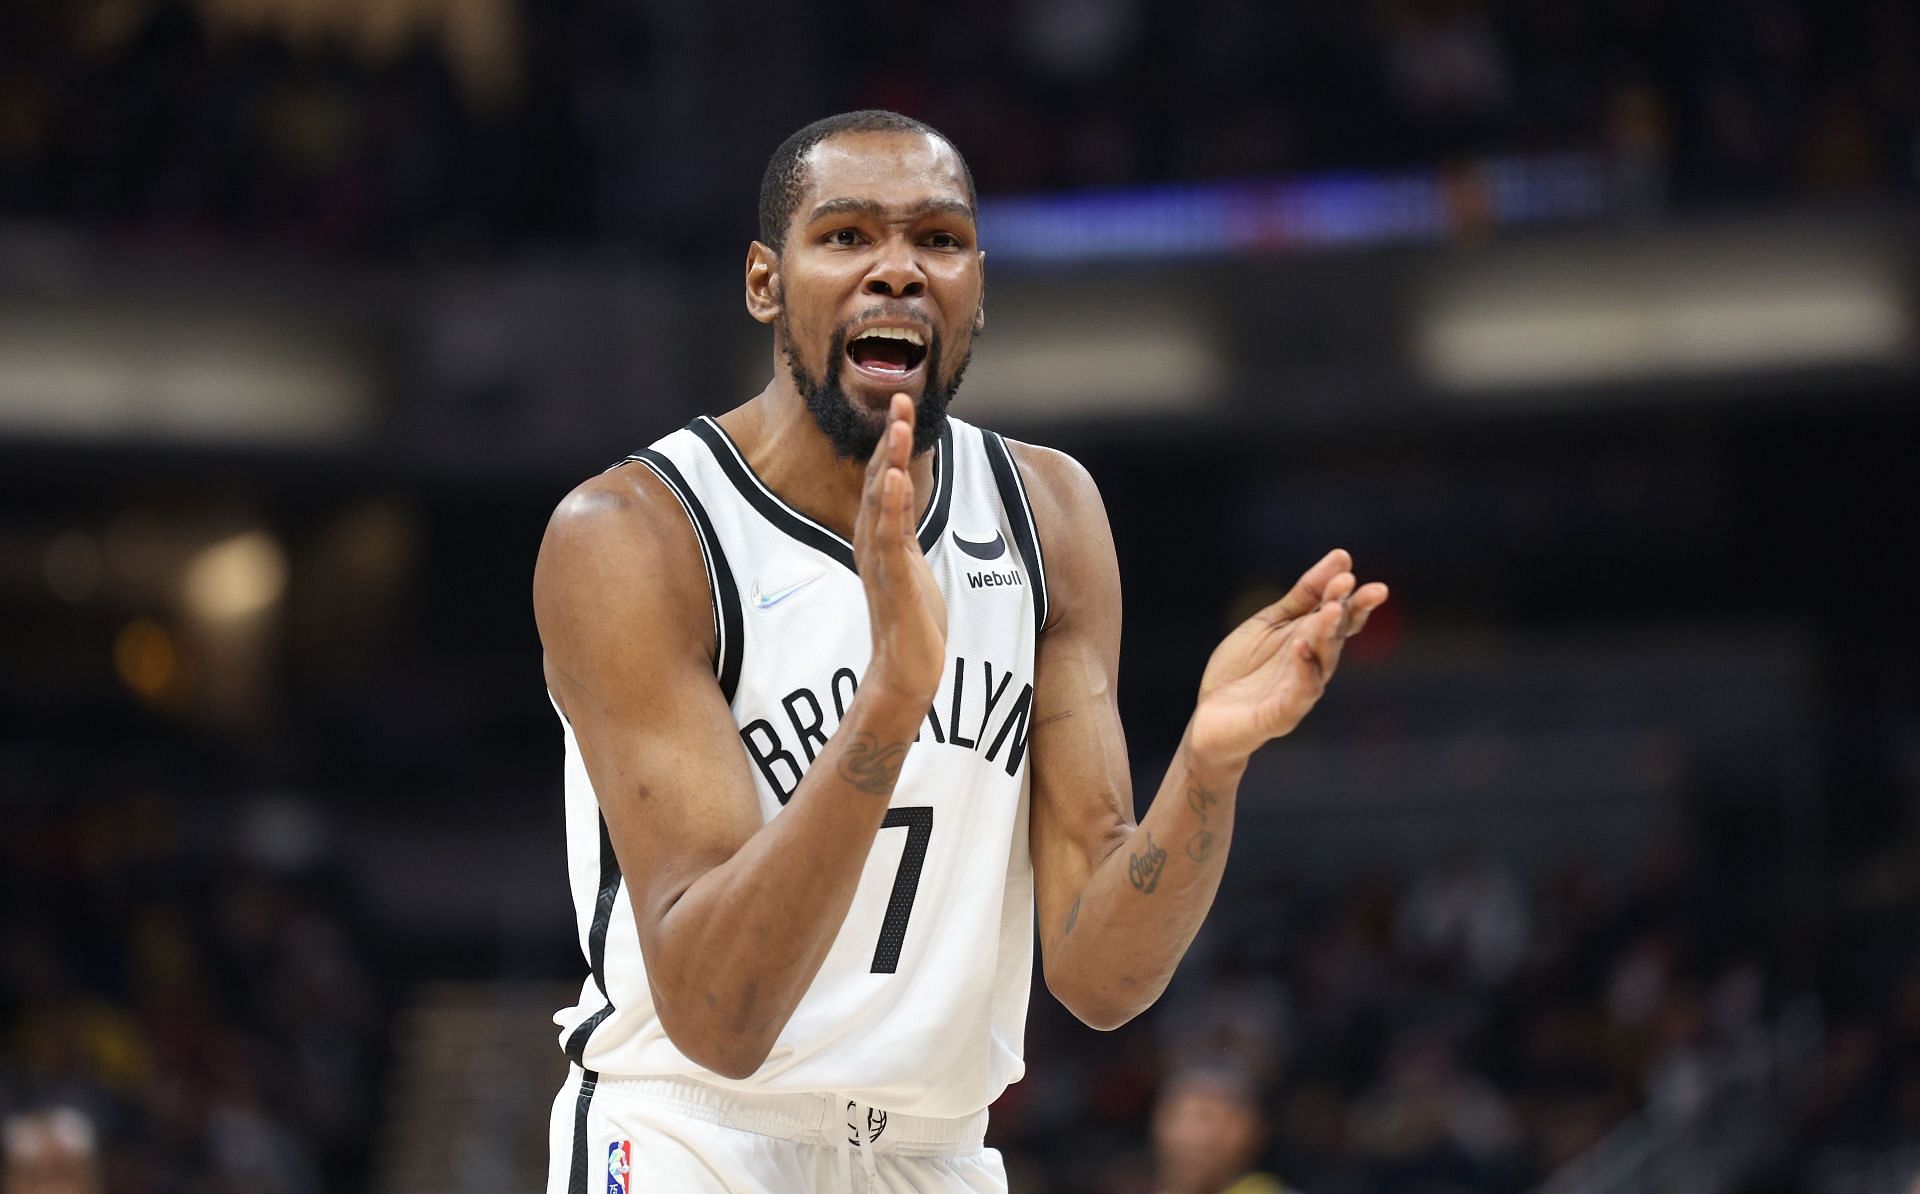 Kevin Durant #7 of the Brooklyn Nets during the game against the Indiana Pacers at Gainbridge Fieldhouse on January 05, 2022 in Indianapolis, Indiana.